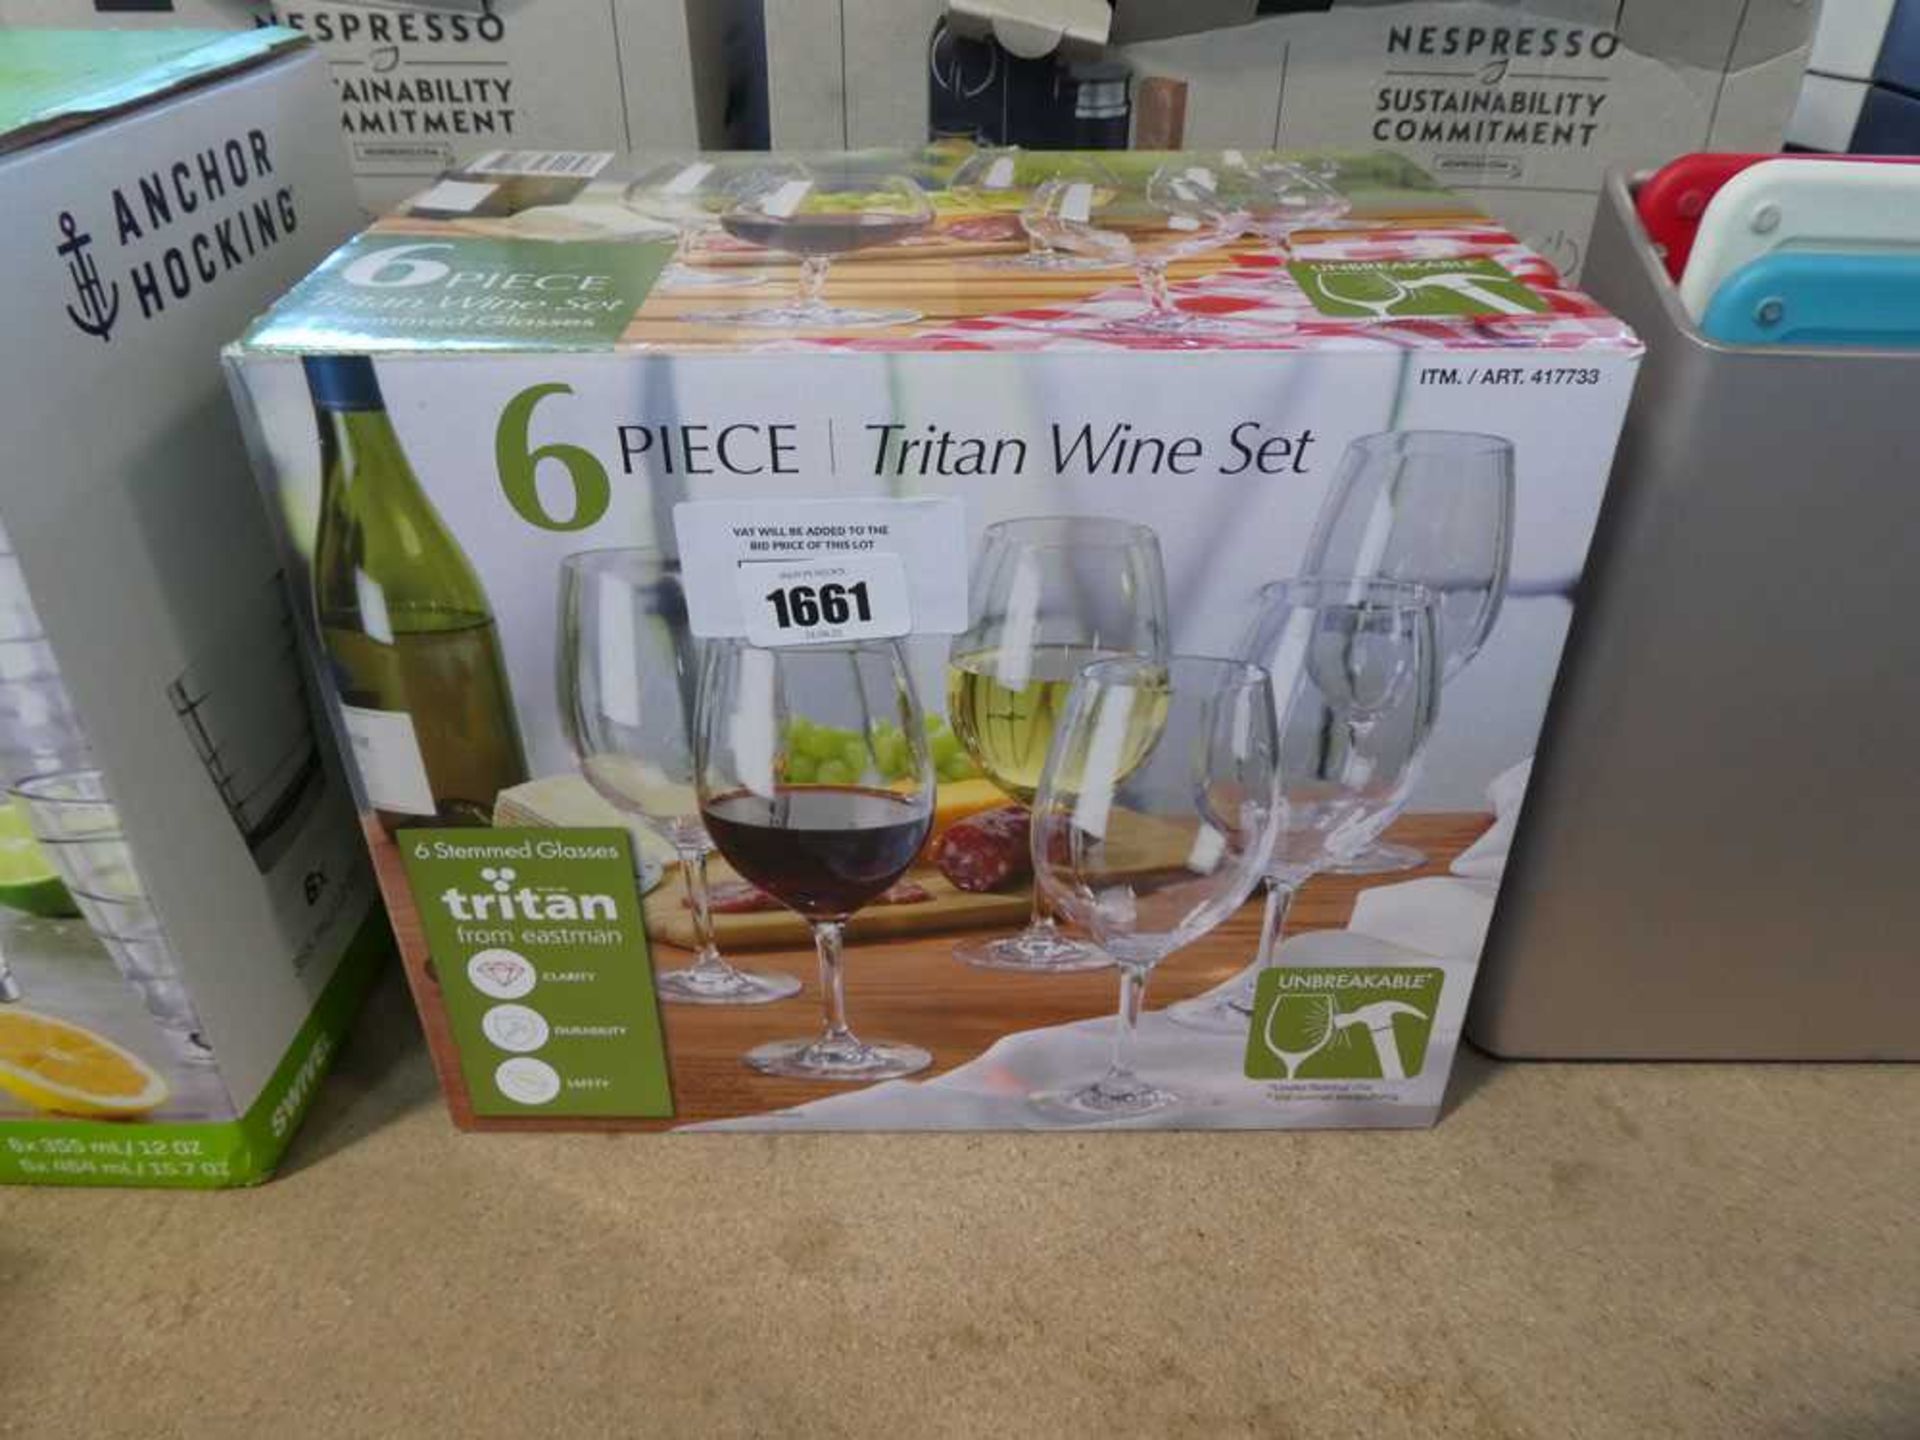 +VAT 6 piece Triton wine set - Incomplete. Only contains 4 glasses.